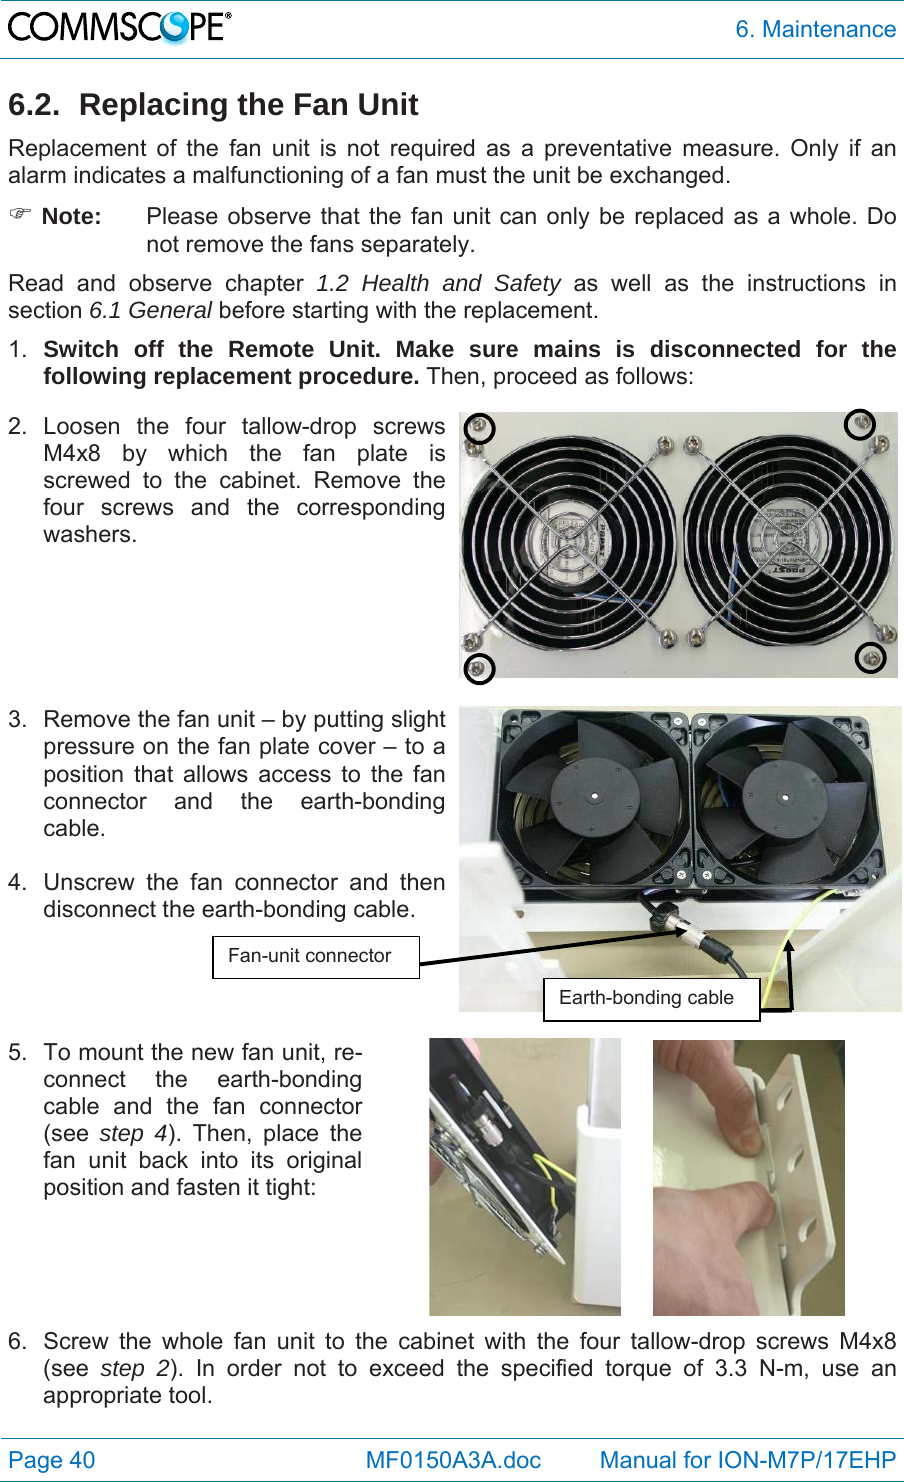  6. Maintenance Page 40            MF0150A3A.doc         Manual for ION-M7P/17EHP 6.2.  Replacing the Fan Unit Replacement of the fan unit is not required as a preventative measure. Only if an alarm indicates a malfunctioning of a fan must the unit be exchanged.  Note:  Please observe that the fan unit can only be replaced as a whole. Do not remove the fans separately. Read and observe chapter 1.2 Health and Safety as well as the instructions in section 6.1 General before starting with the replacement.  1.  Switch off the Remote Unit. Make sure mains is disconnected for the following replacement procedure. Then, proceed as follows: 2. Loosen the four tallow-drop screws M4x8 by which the fan plate is screwed to the cabinet. Remove the four screws and the corresponding washers.    3.  Remove the fan unit – by putting slight pressure on the fan plate cover – to a position that allows access to the fan connector and the earth-bonding cable.   4.  Unscrew the fan connector and then disconnect the earth-bonding cable.    5.  To mount the new fan unit, re-connect the earth-bonding cable and the fan connector (see  step 4). Then, place the fan unit back into its original position and fasten it tight:       6.  Screw the whole fan unit to the cabinet with the four tallow-drop screws M4x8 (see  step 2). In order not to exceed the specified torque of 3.3 N-m, use an appropriate tool.  Fan-unit connector Earth-bonding cable 